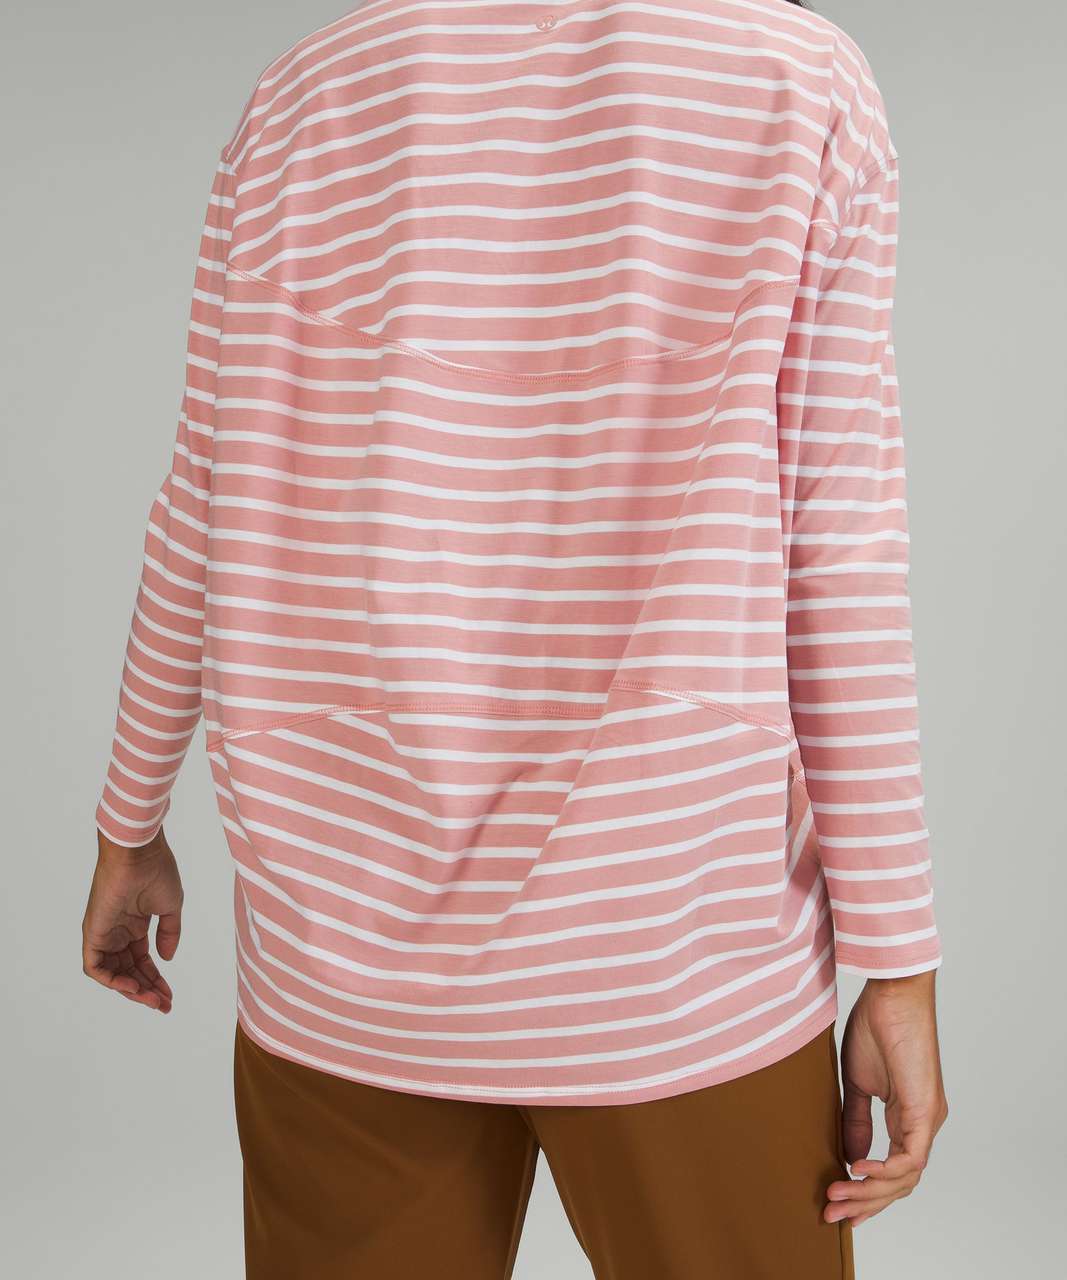 Lululemon Back In Action Long Sleeve Shirt - Yachtie Stripe Pink Pastel White